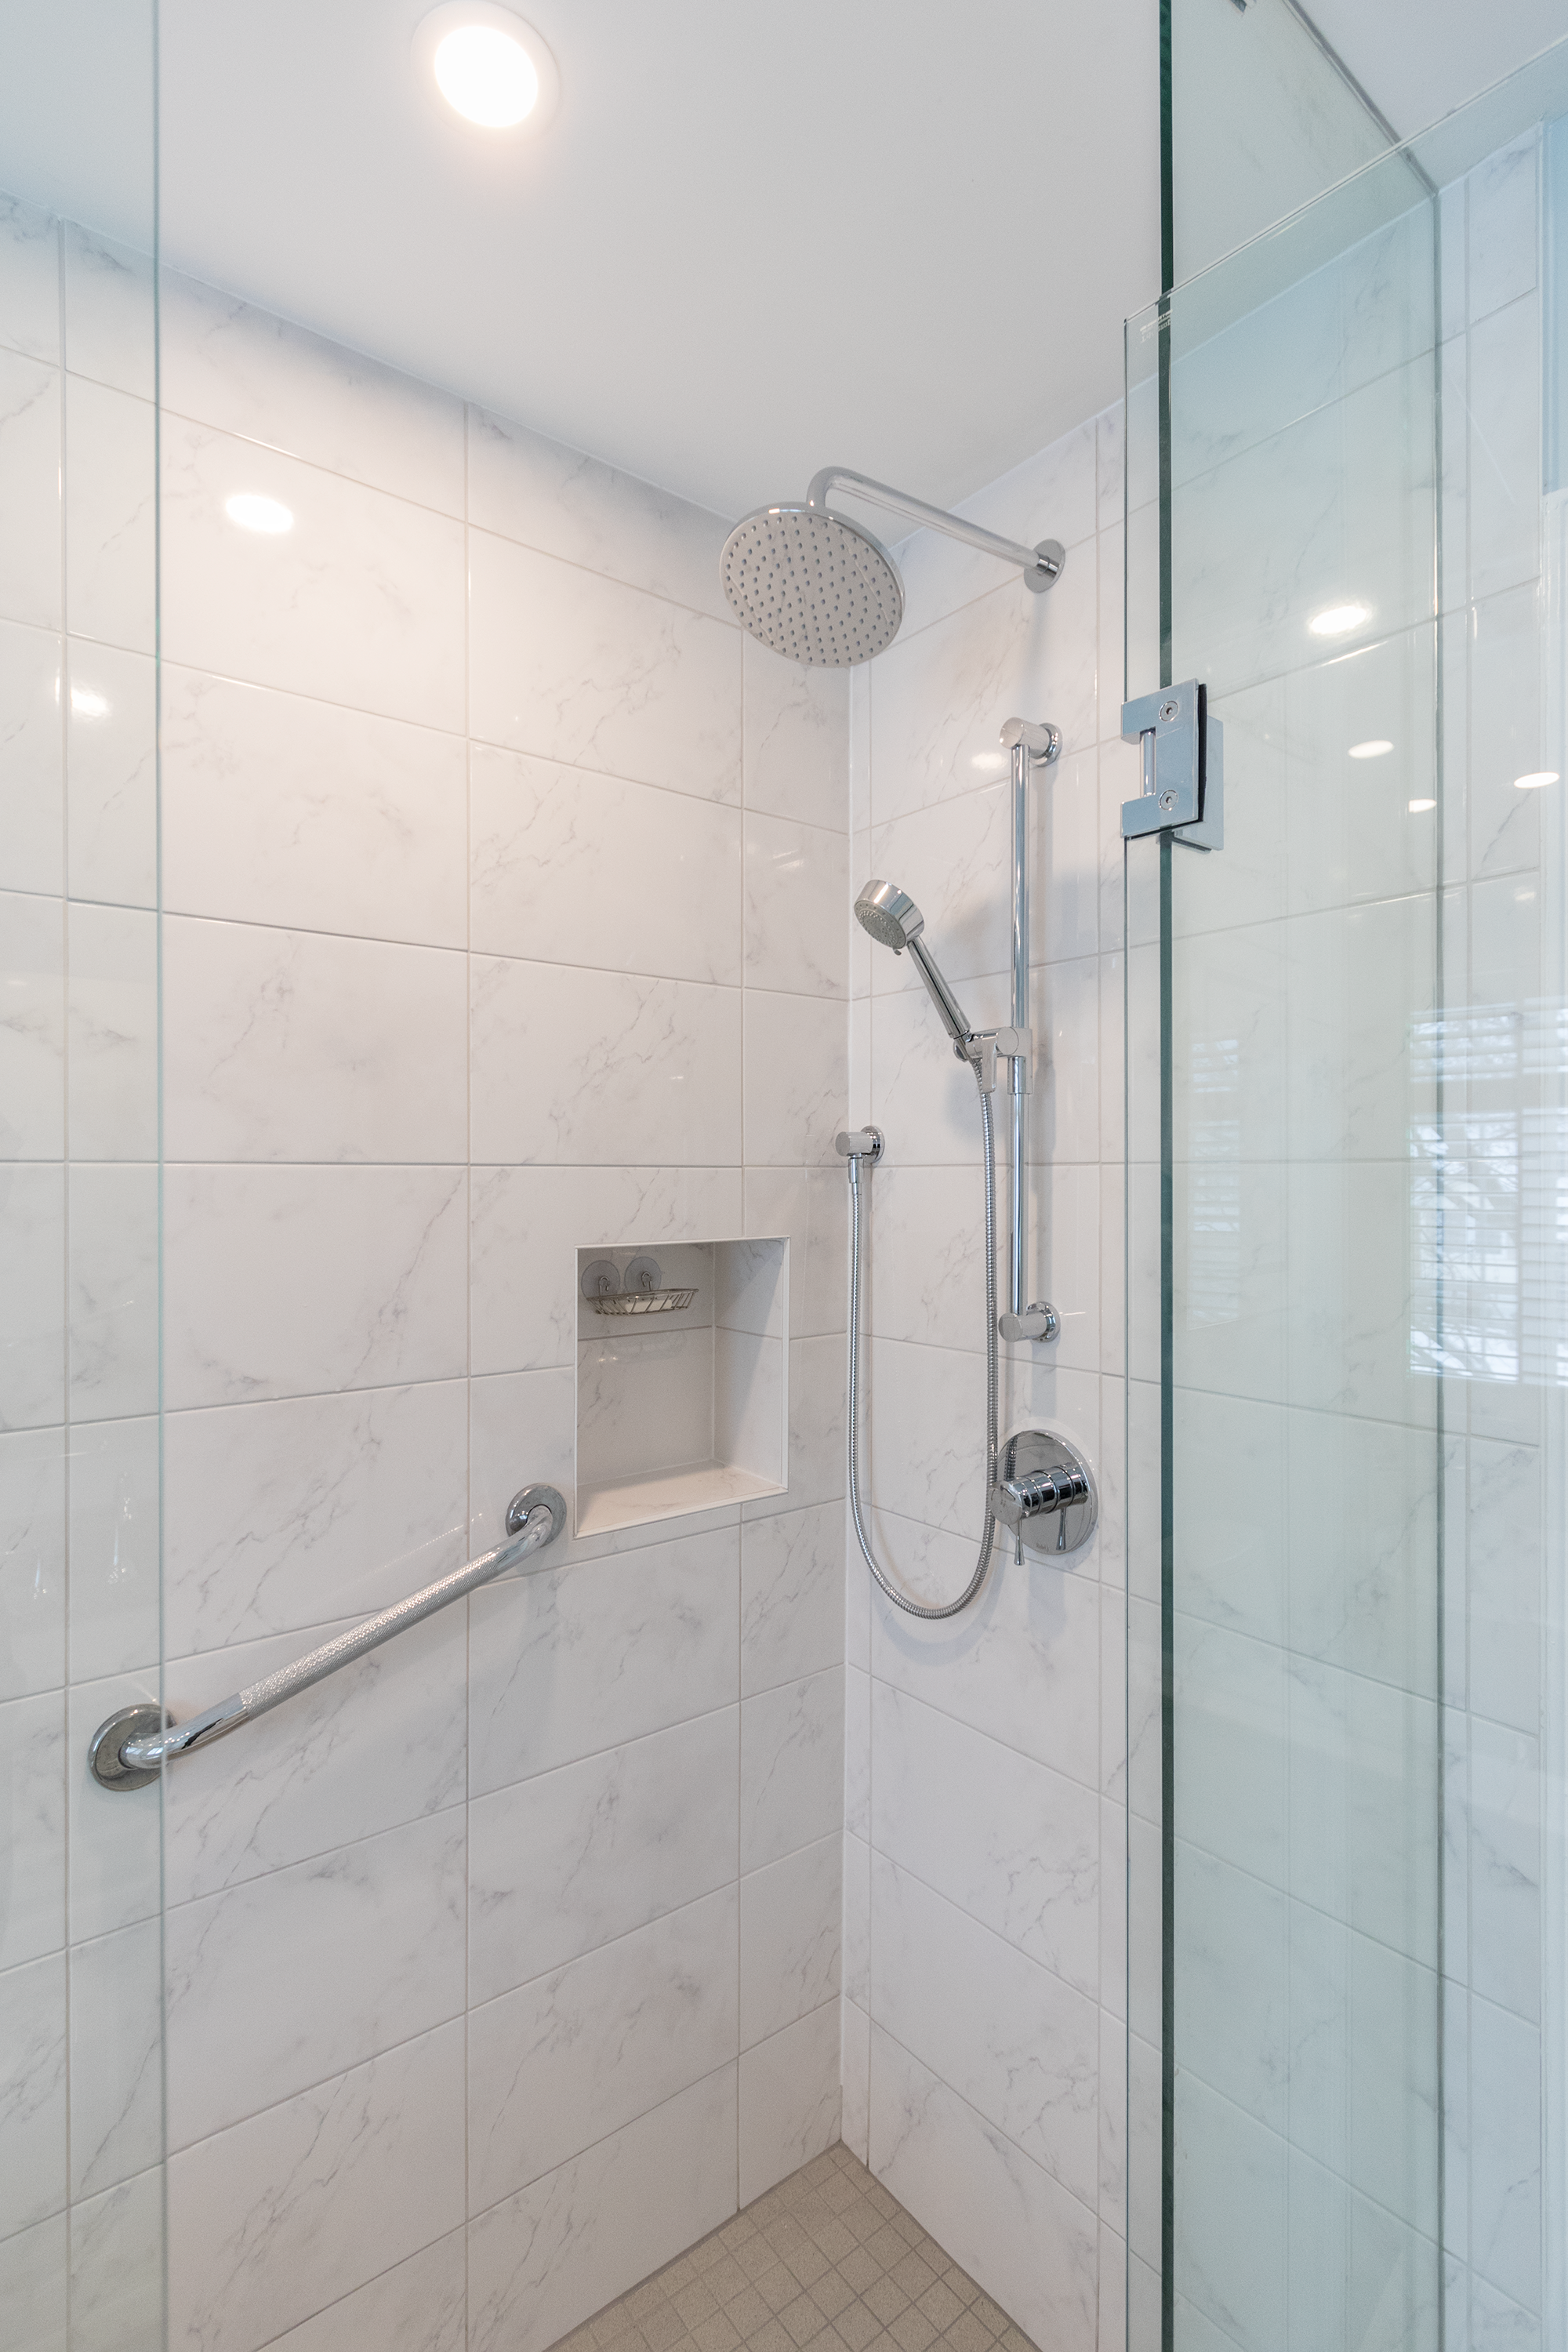 Converting Your Tub To A Walk In Shower, Converting A Bathtub Into Shower Stall